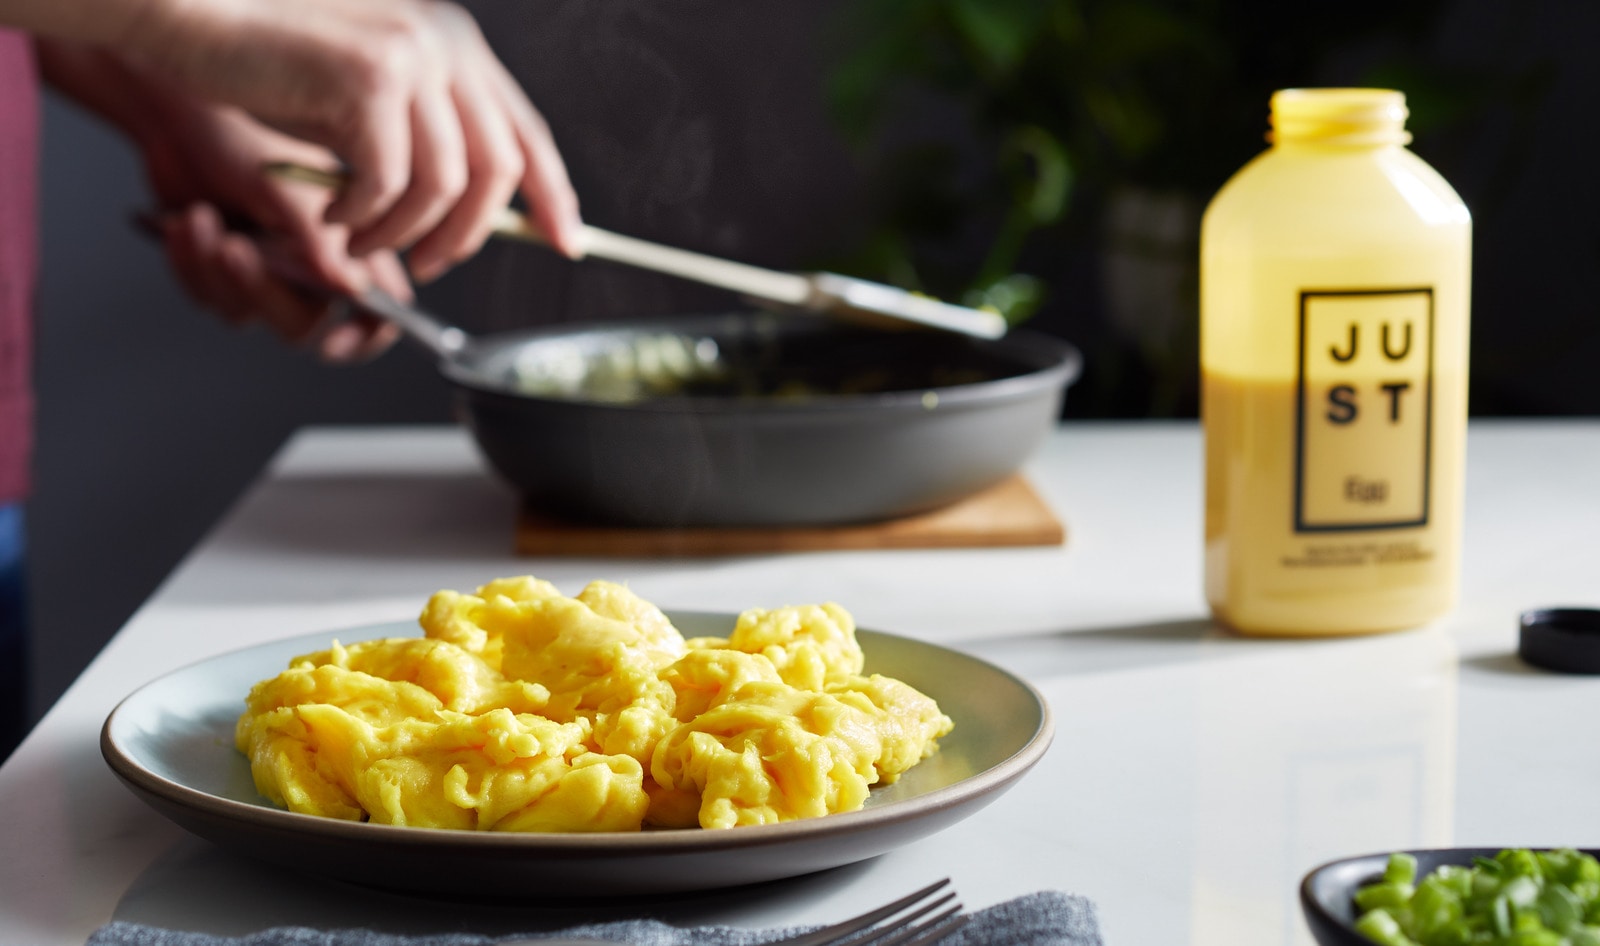 Vegan Just Egg Will Finally Be Available Nationwide in April&nbsp;